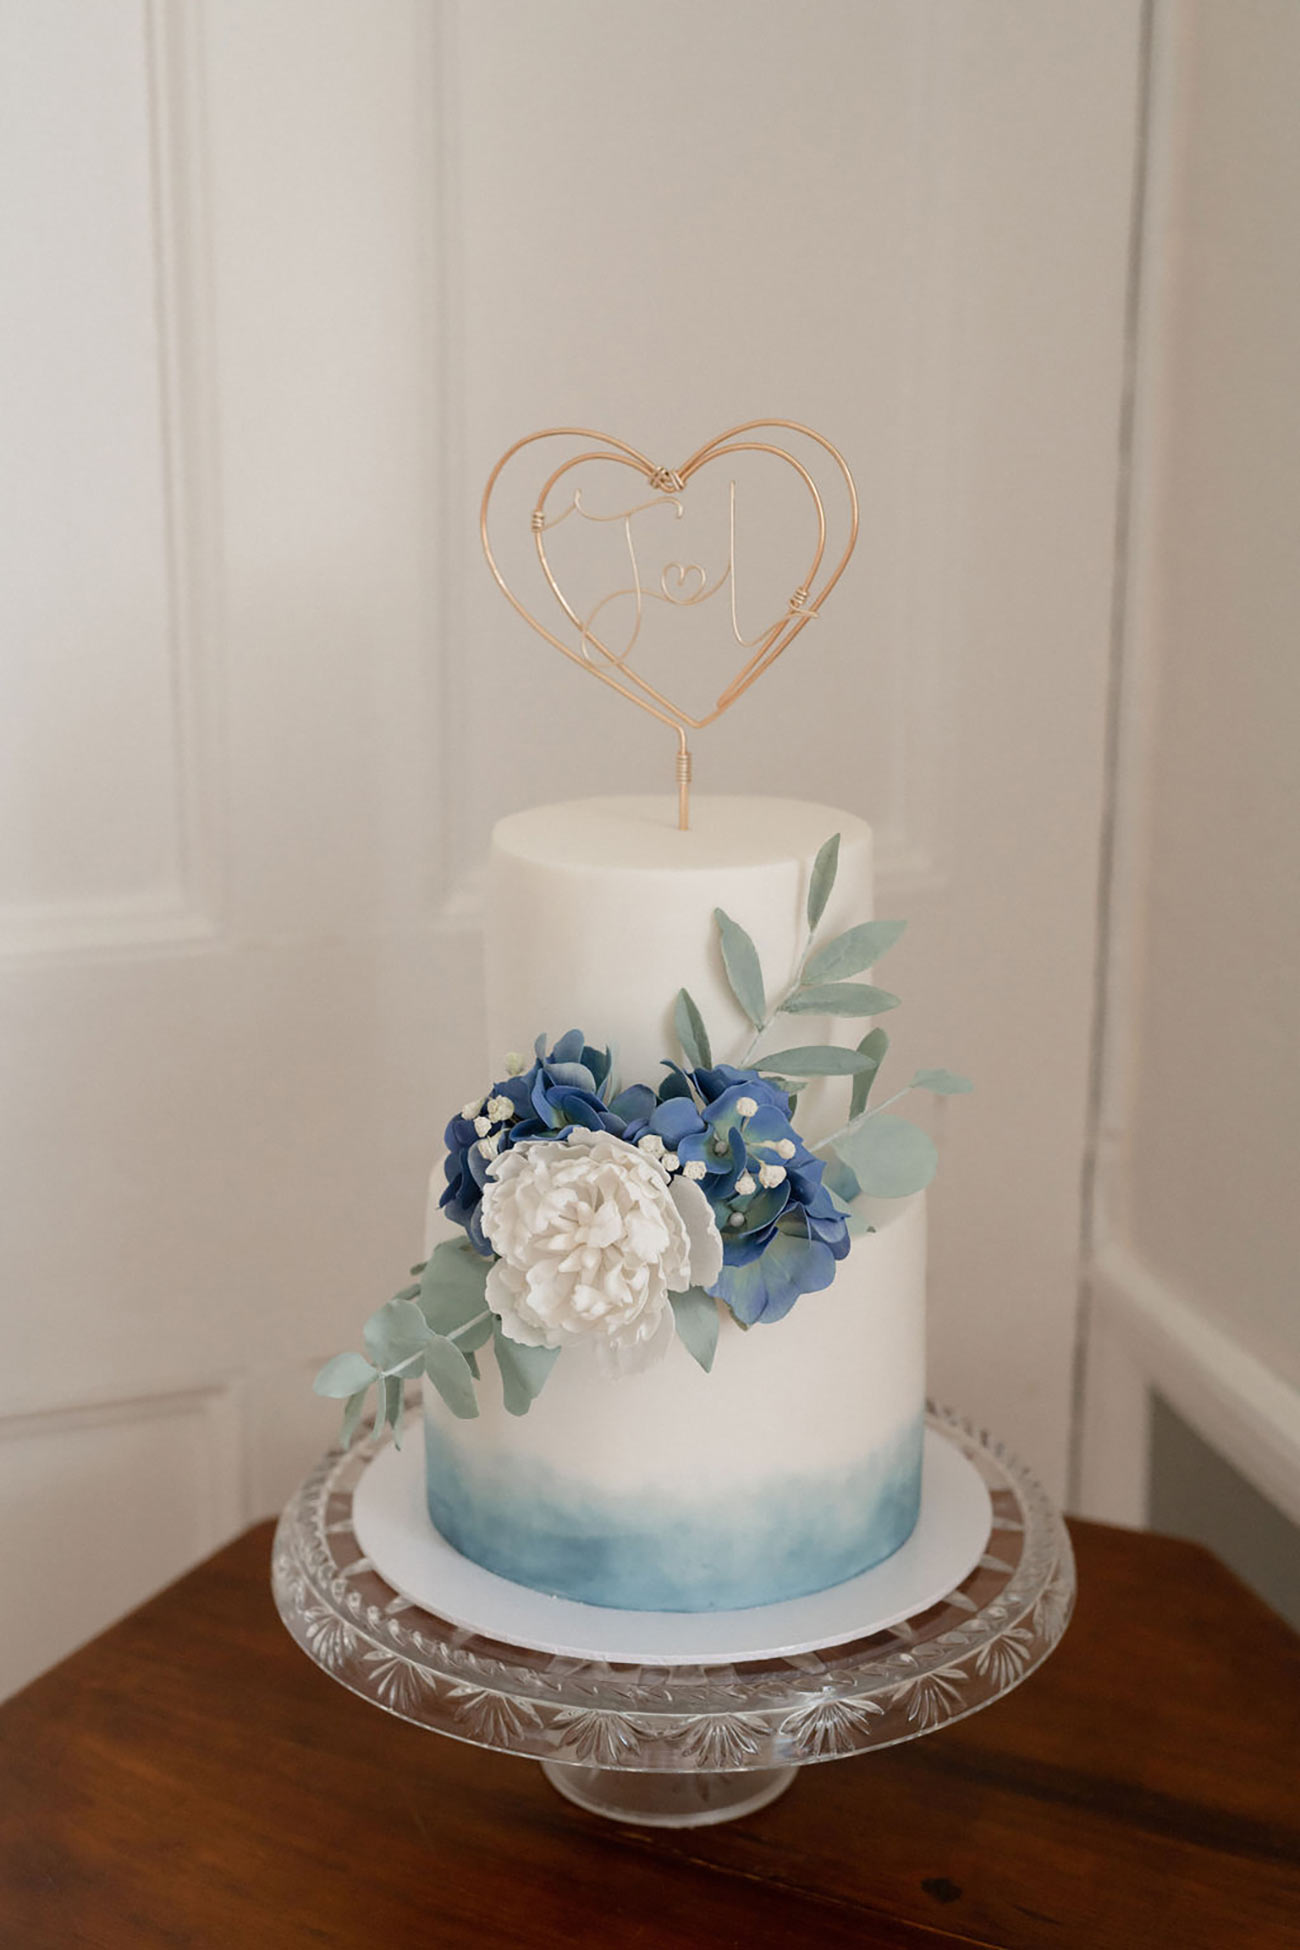 Ombre Effect Cakes Wed Magazine Feature Cornwall Devon Bride Groom3